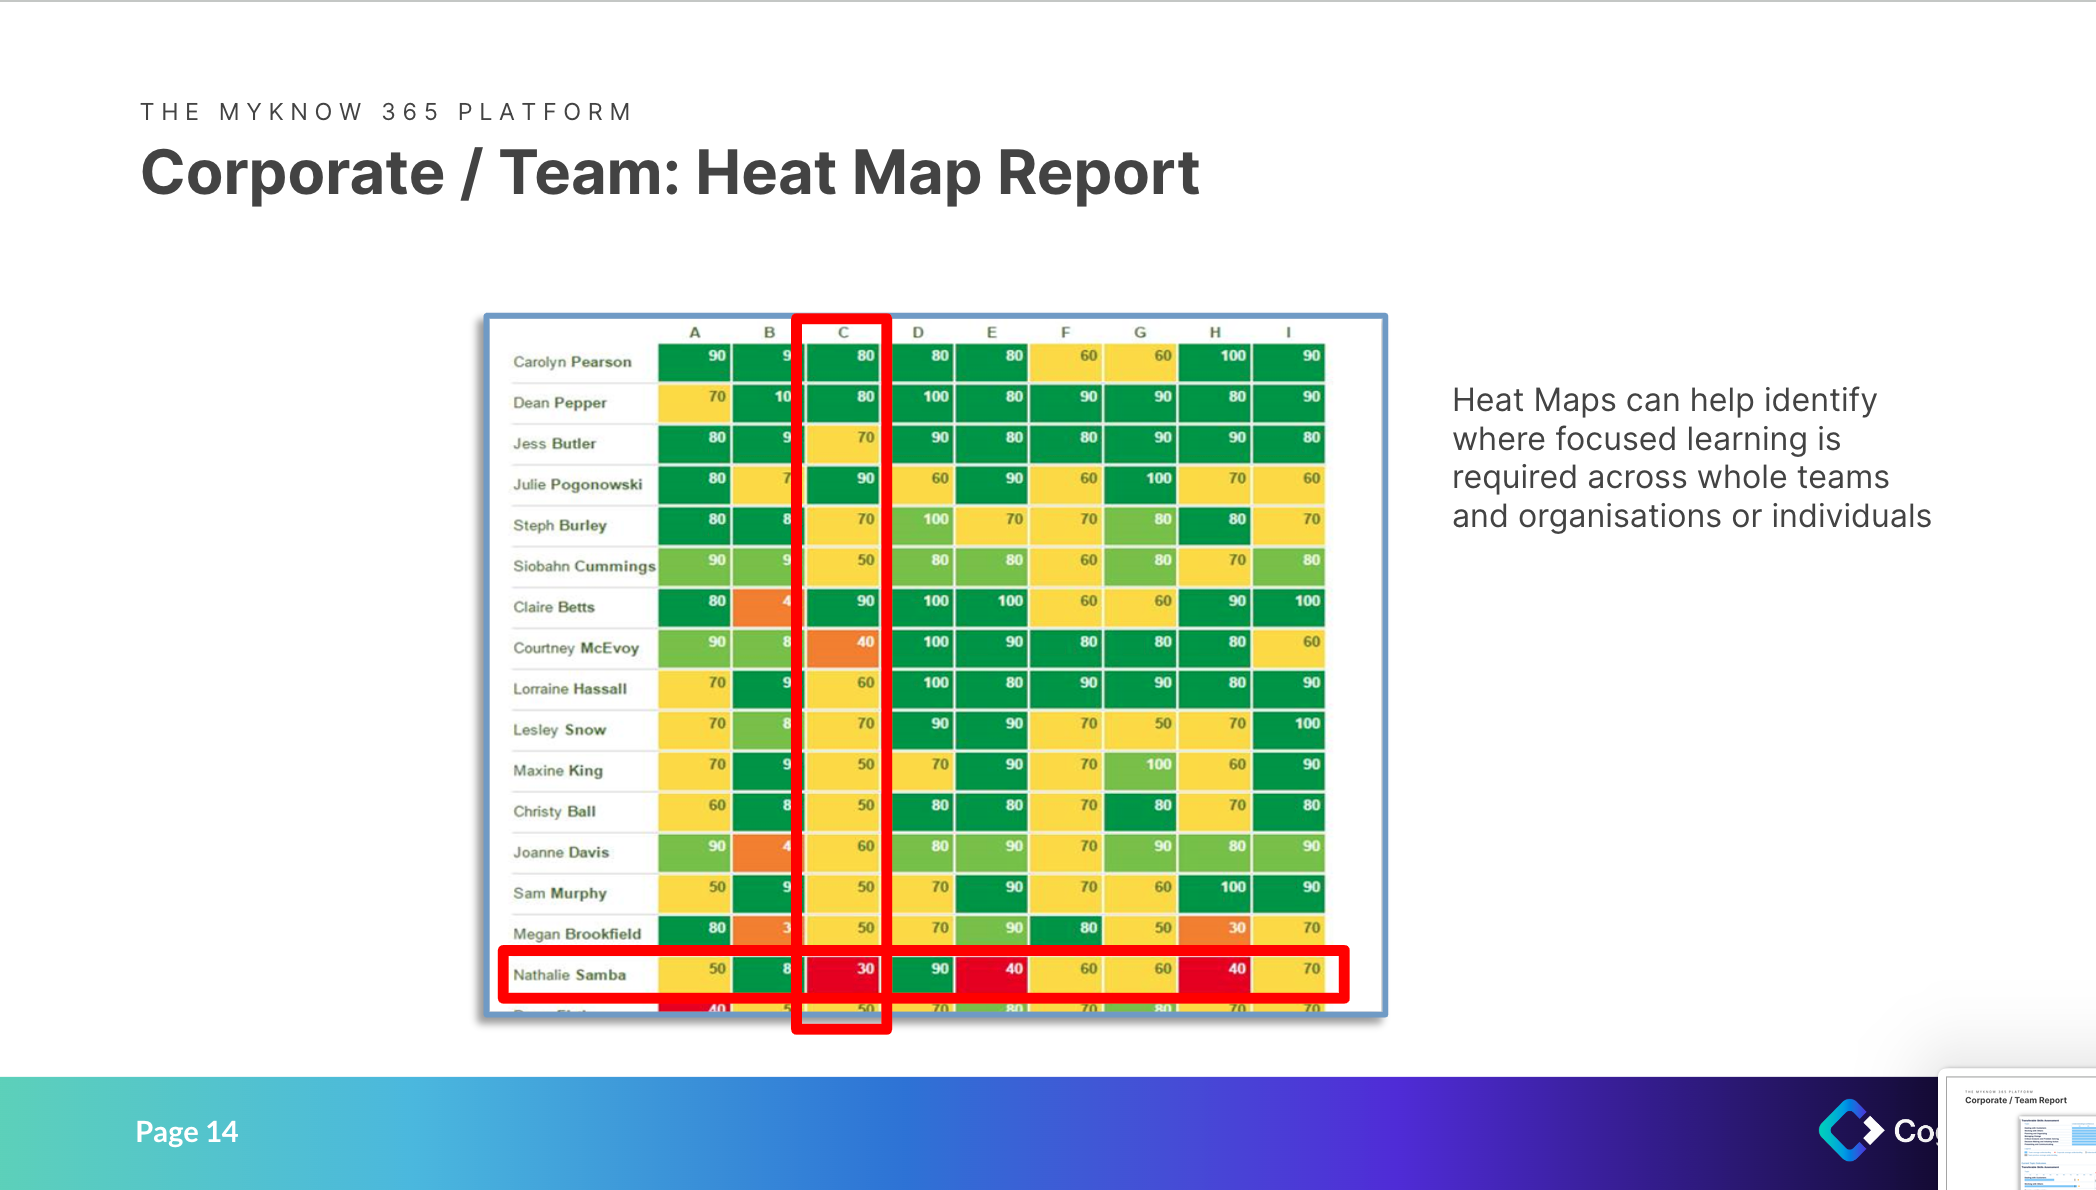 Heat Maps can help identify where focused learning is required across whole teams and organisations or individuals